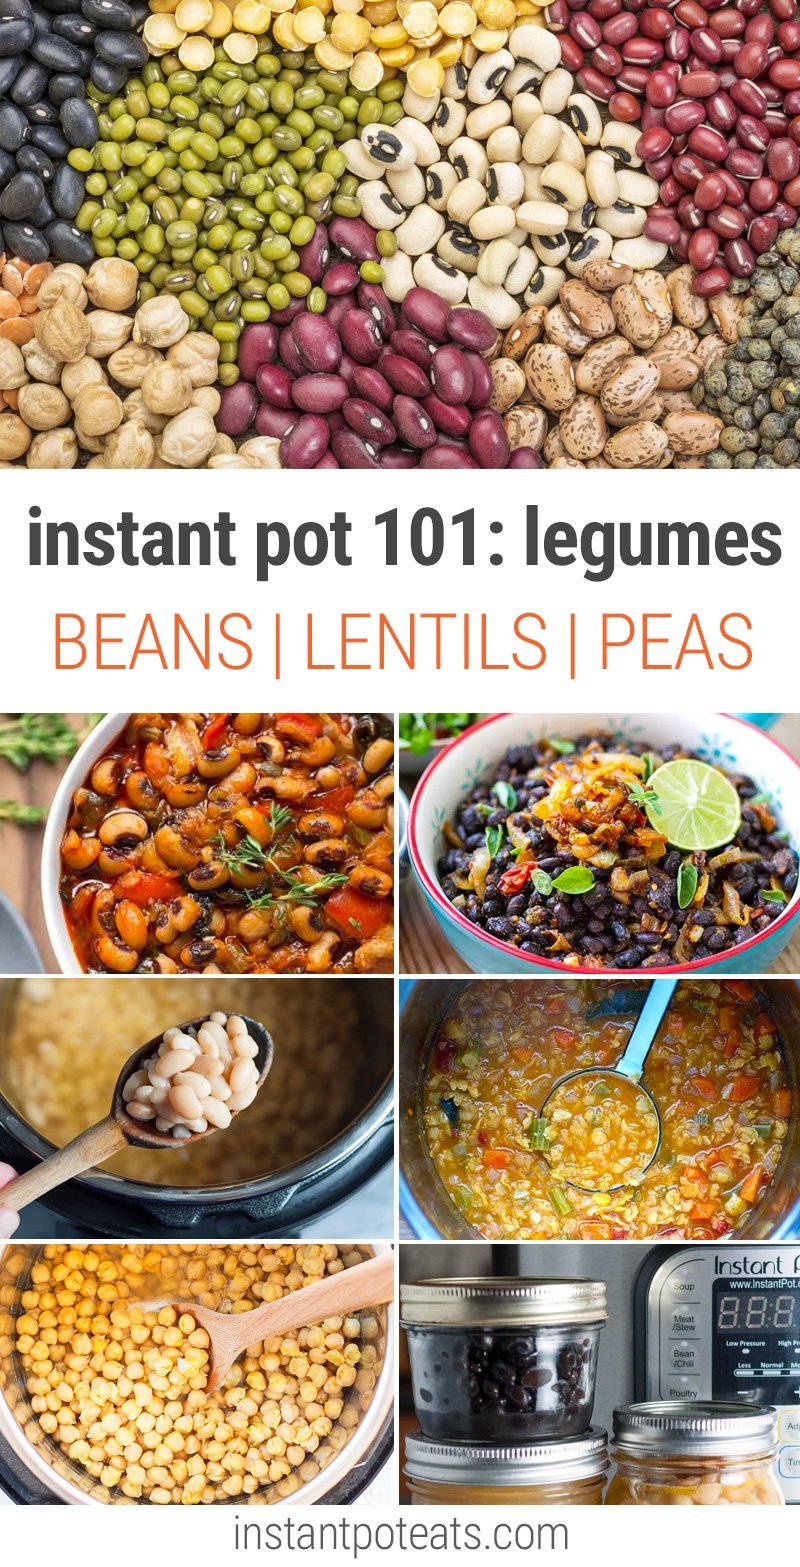  How To Cook Beans, Lentils, Peas in Instant Pot